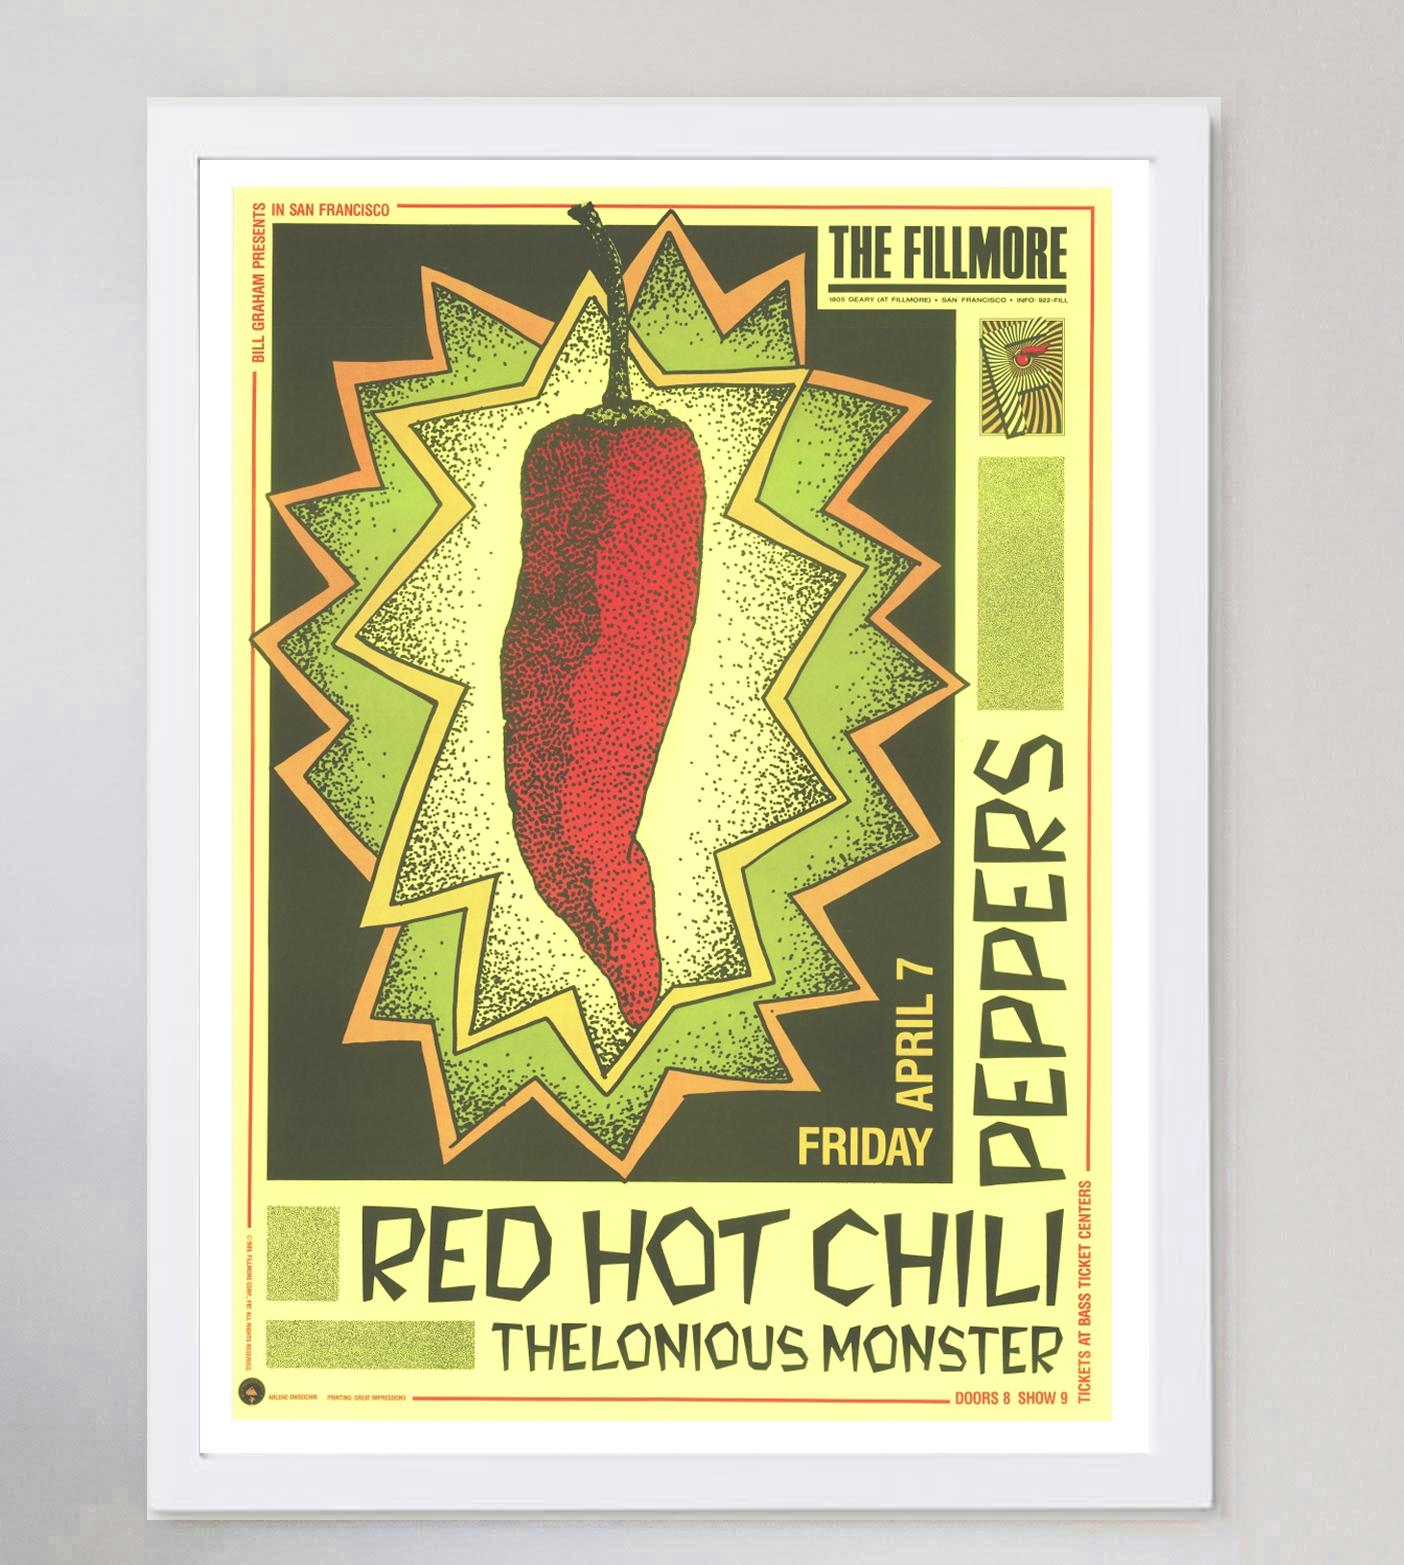 1989 Red Hot Chili Peppers - The Fillmore Original Vintage Poster In Good Condition For Sale In Winchester, GB